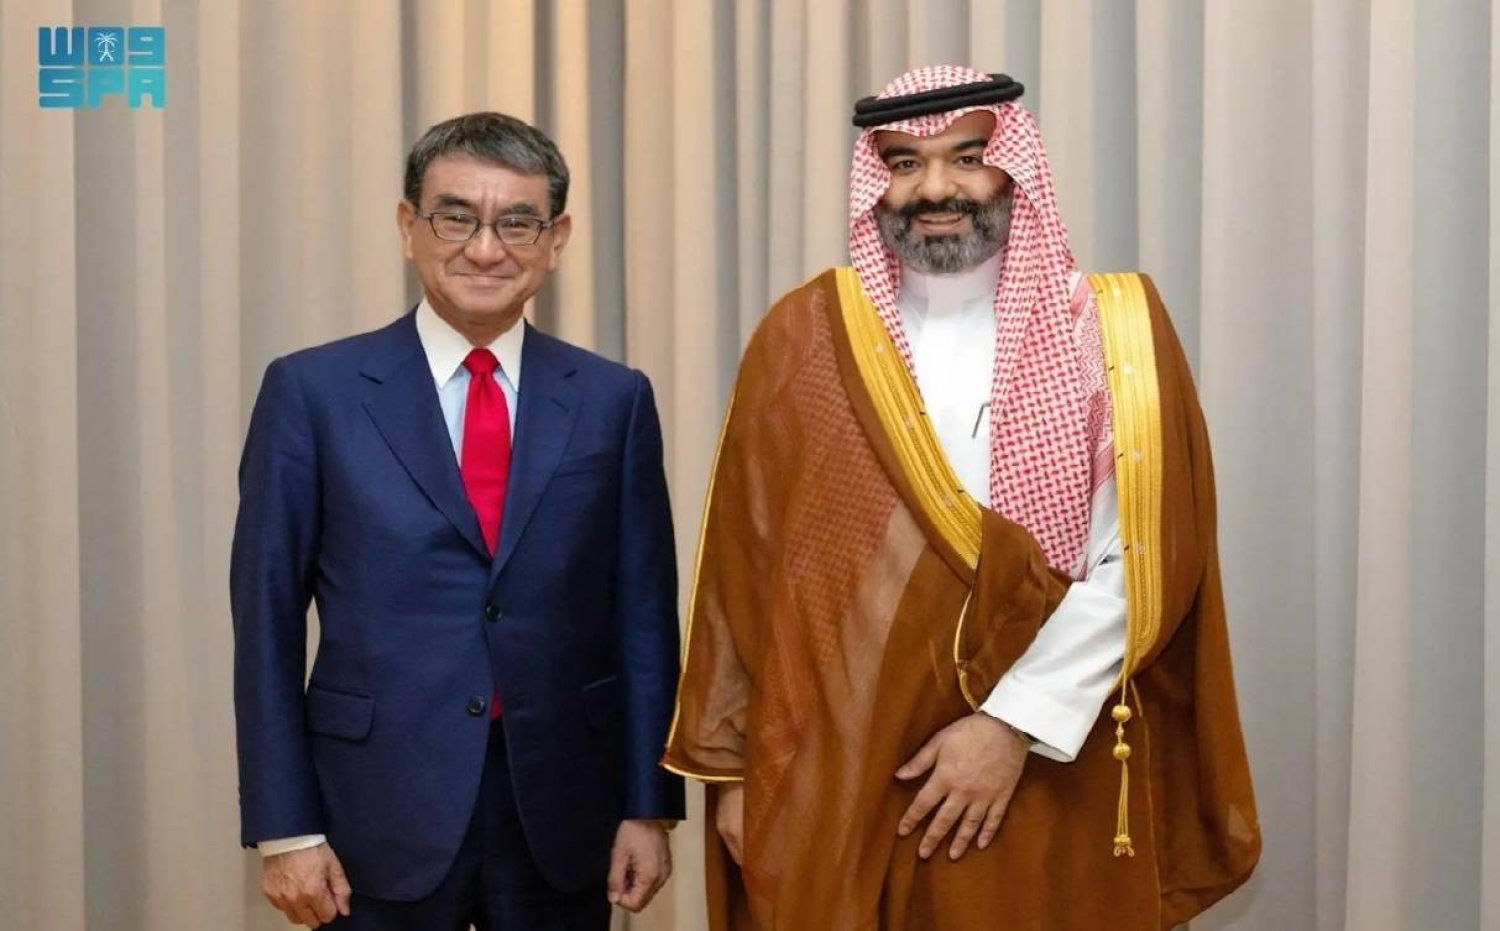 Saudi Minister of Communications and Information Technology Eng. Abdullah bin Amer Al-Swaha met on Saturday in Jeddah with the Japanese Minister for Digital Transformation, Taro Kono. SPA